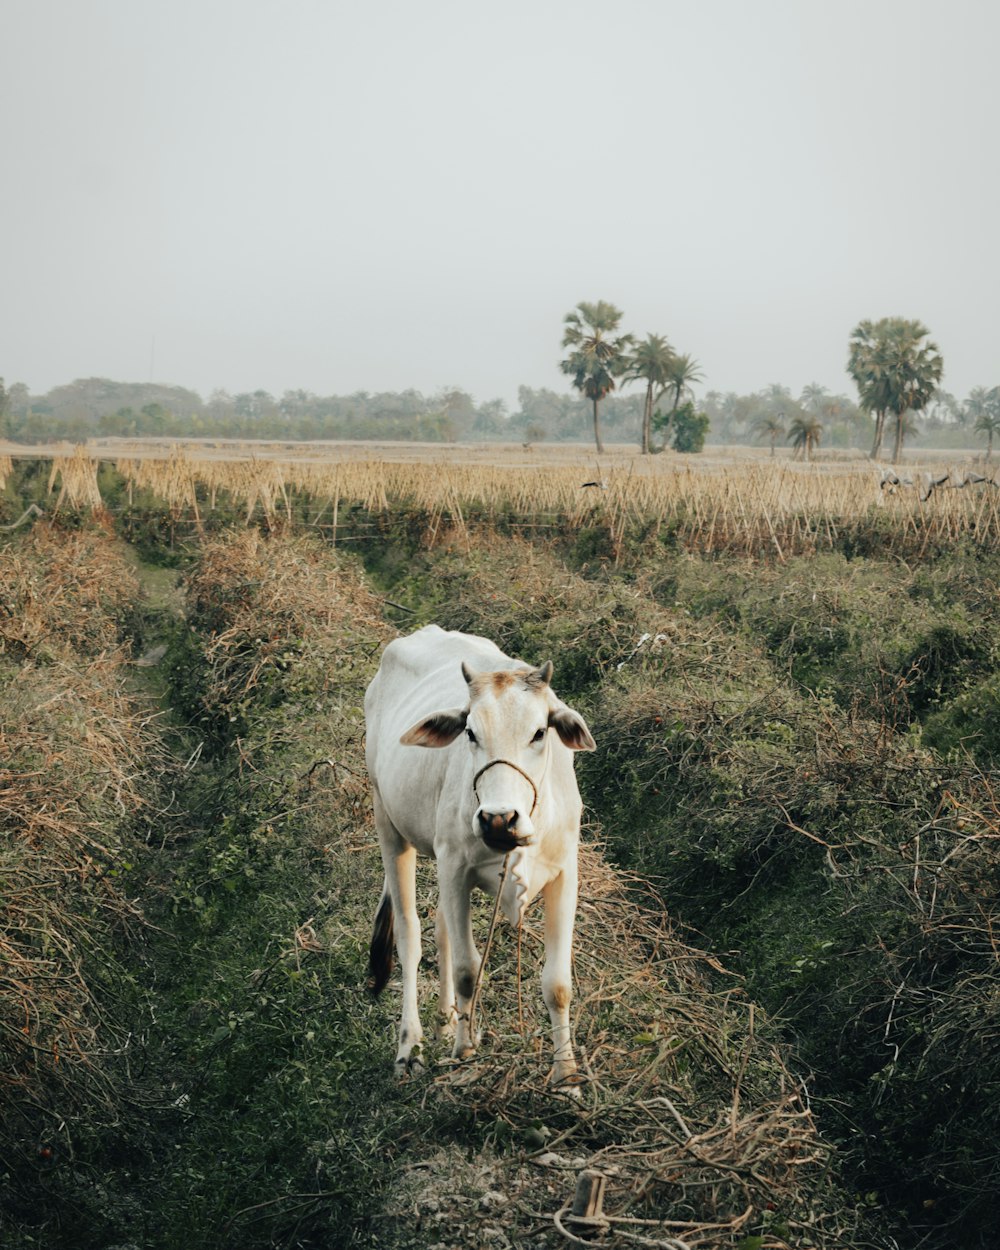 a white cow standing in a field with trees in the background